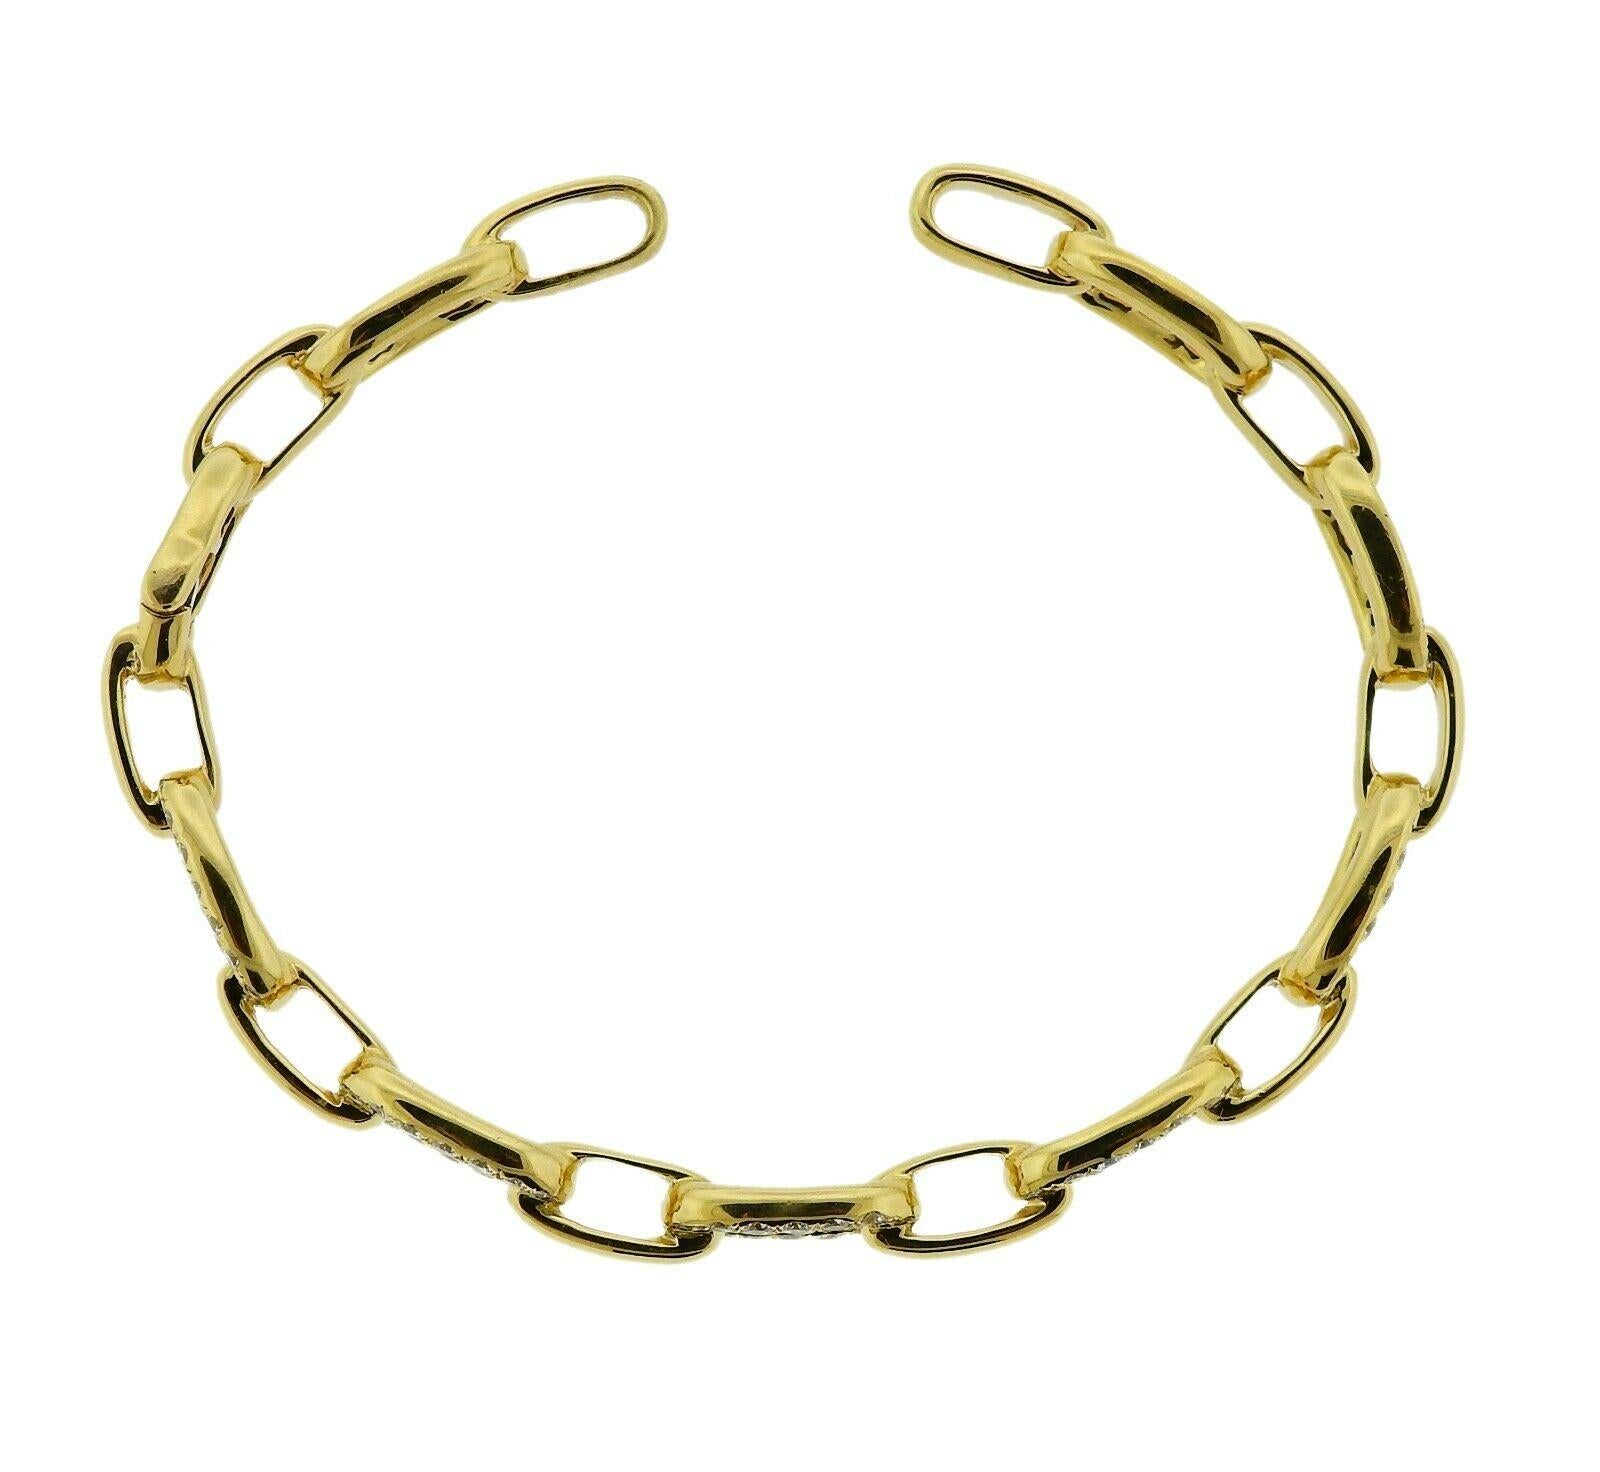 18k yellow gold bracelet featuring approximately 1.97ctw of G/VS diamonds. Retail is $10,200. Bracelet will fit approx. 7